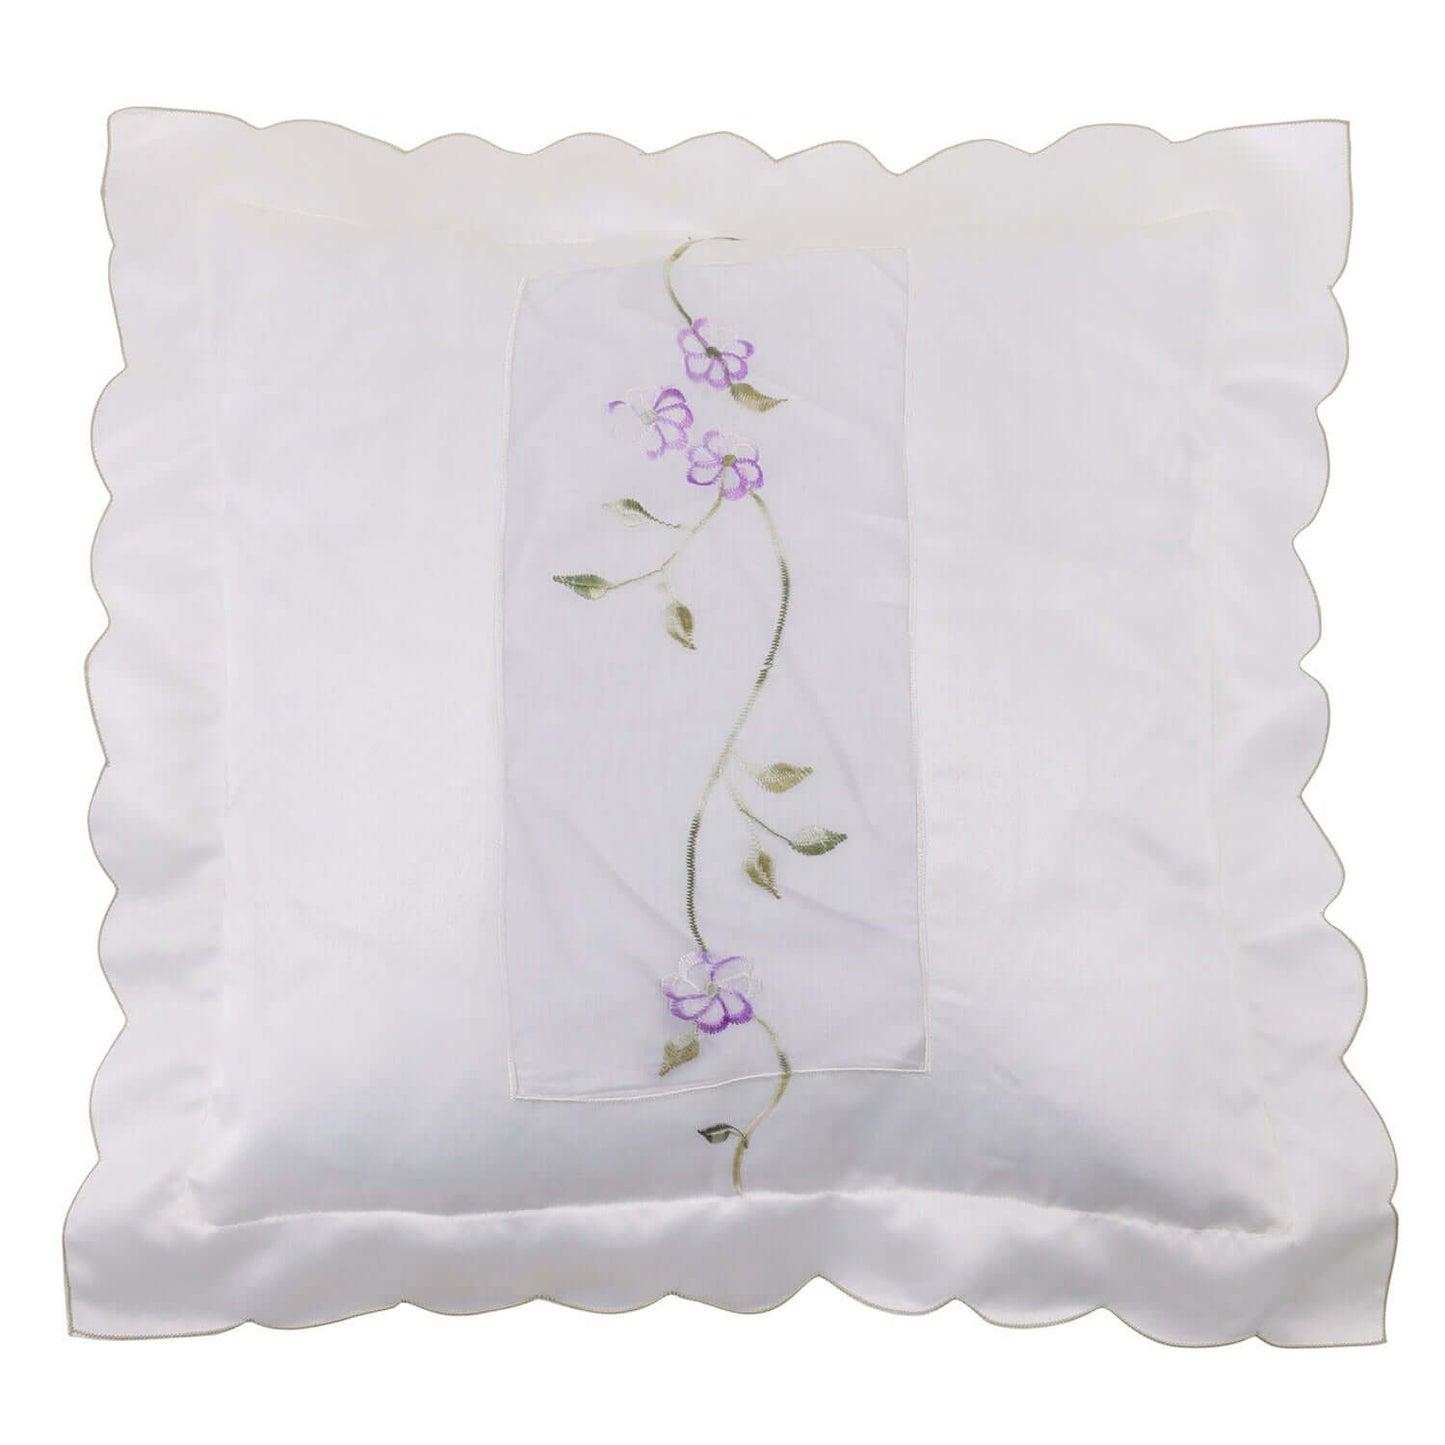 Clematis Cushion Covers (4 pack)